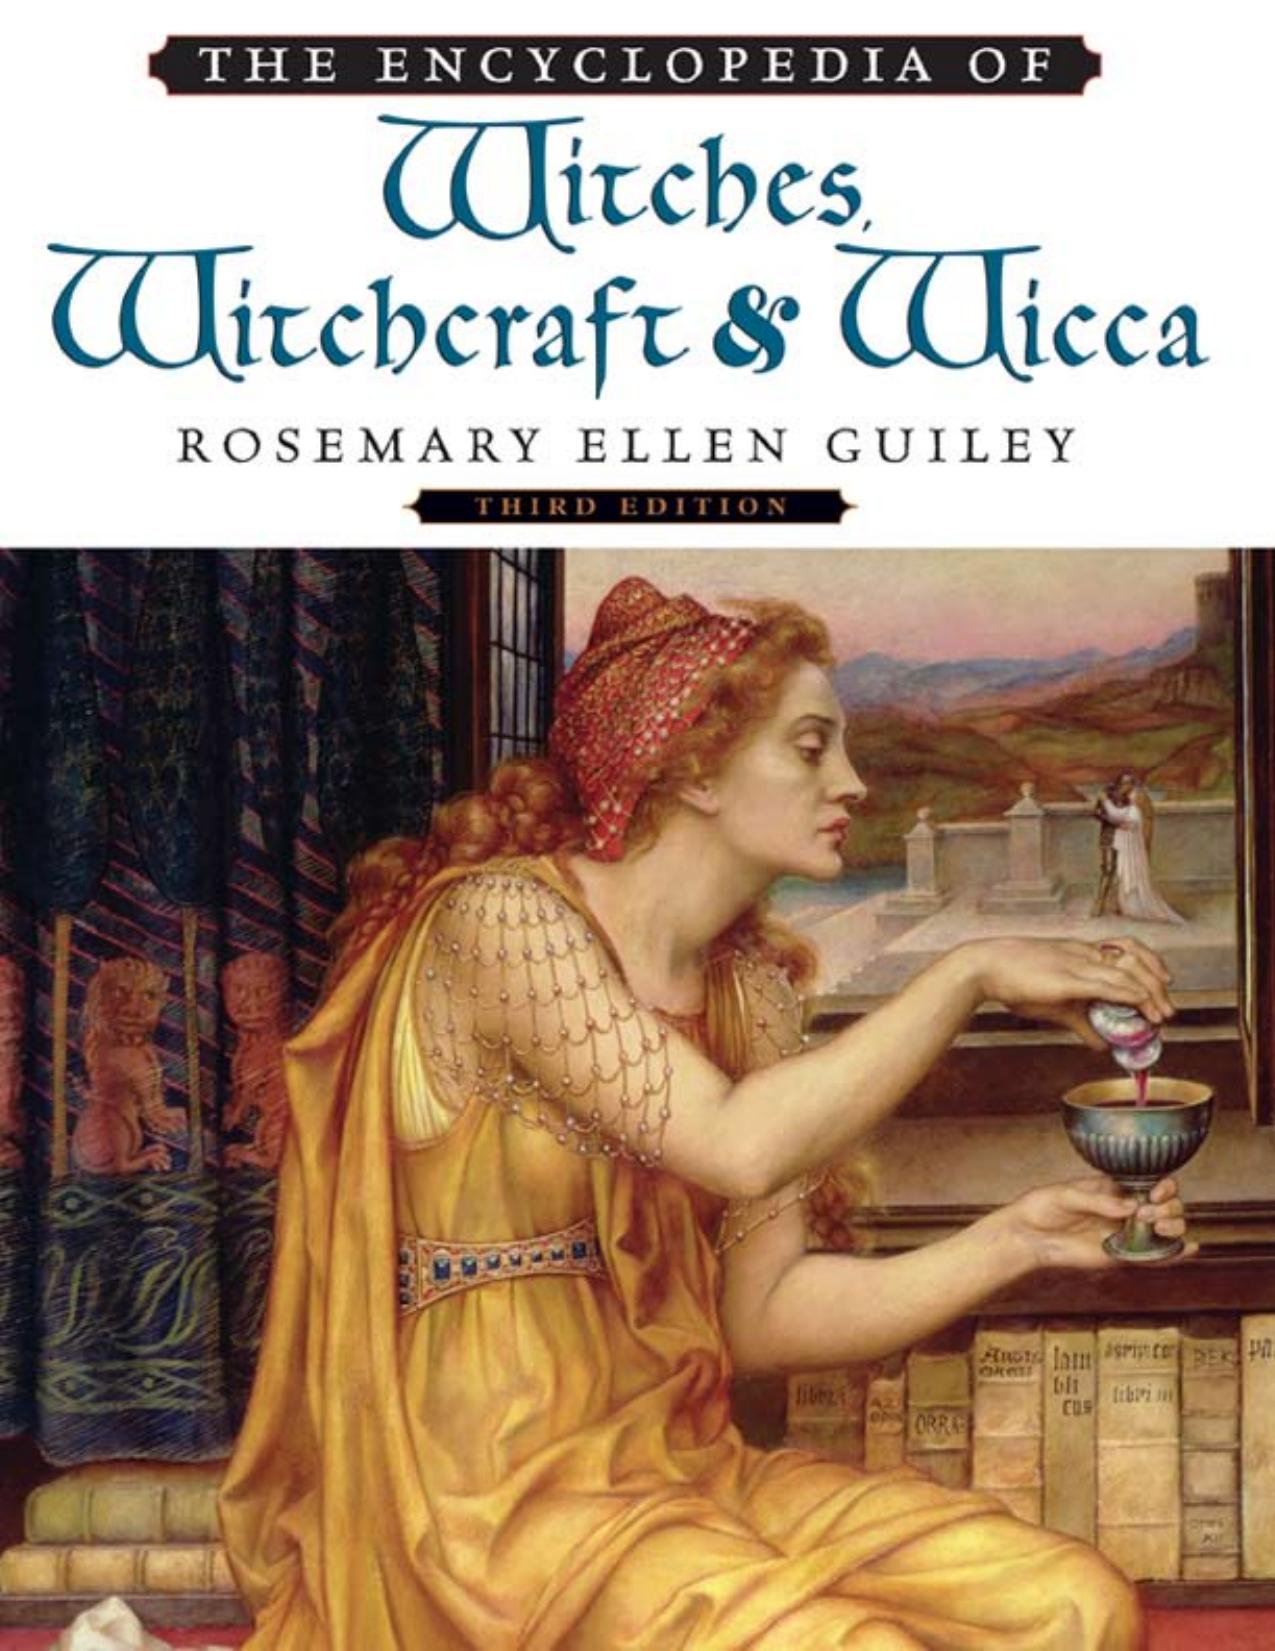 The Encyclopedia of Witches, Witchcraft, and Wicca